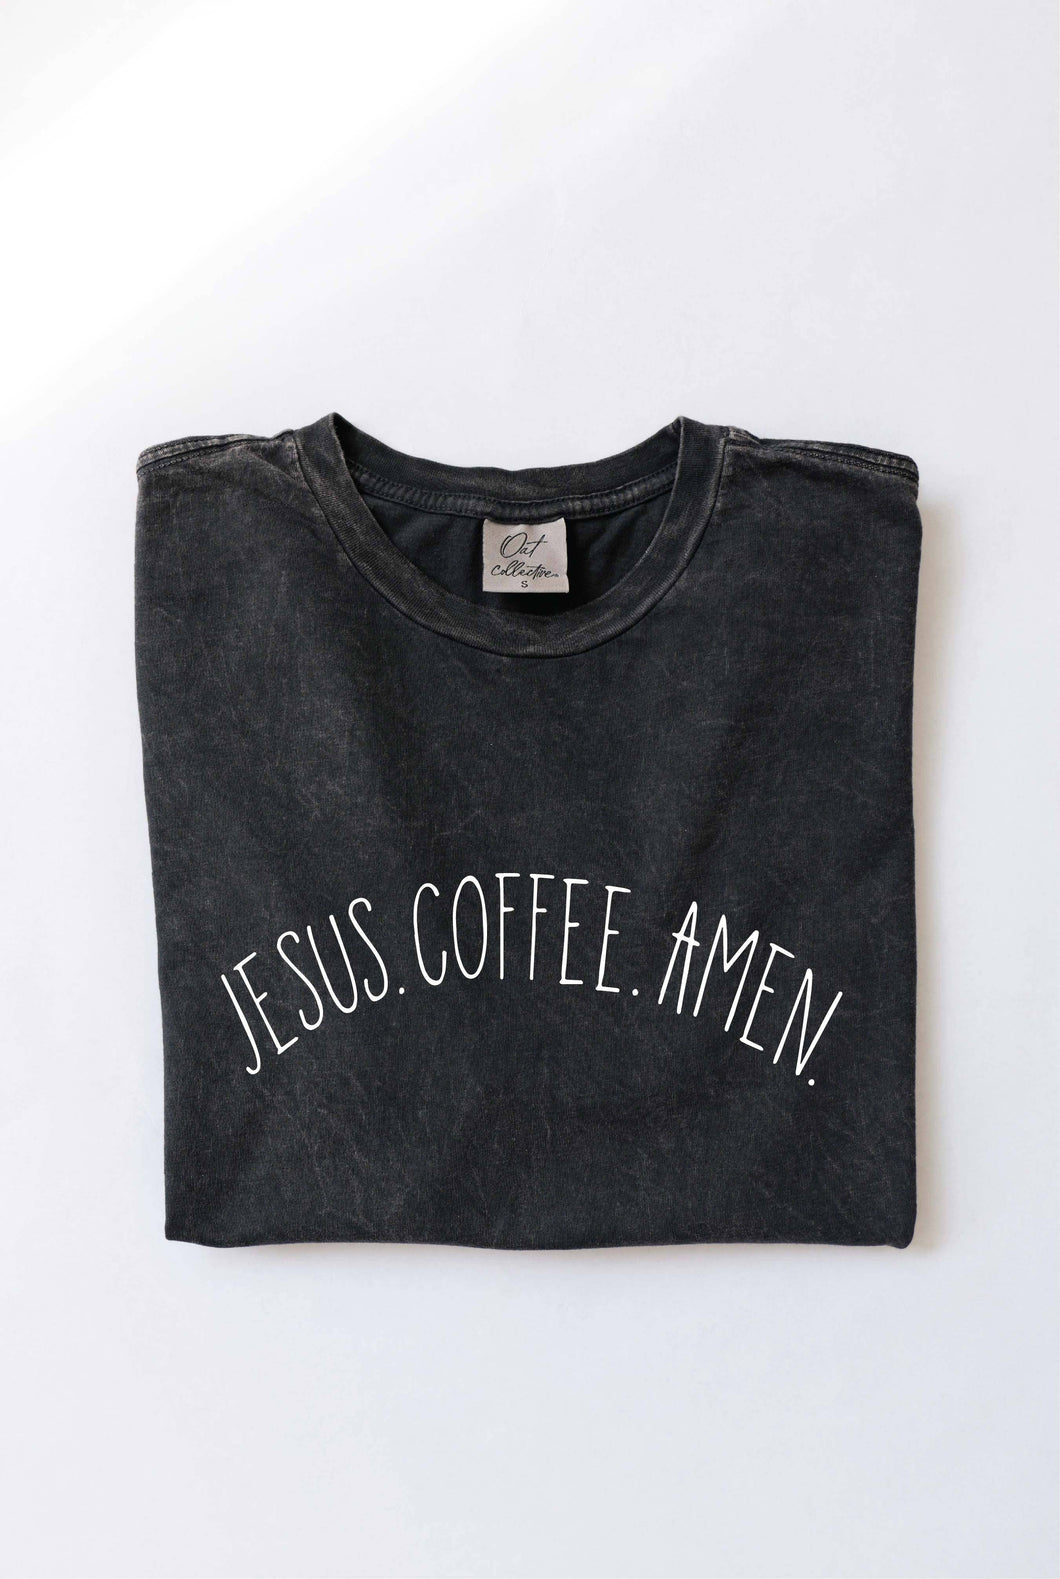 JESUS COFFEE AMEN Mineral Washed Graphic T-shirt